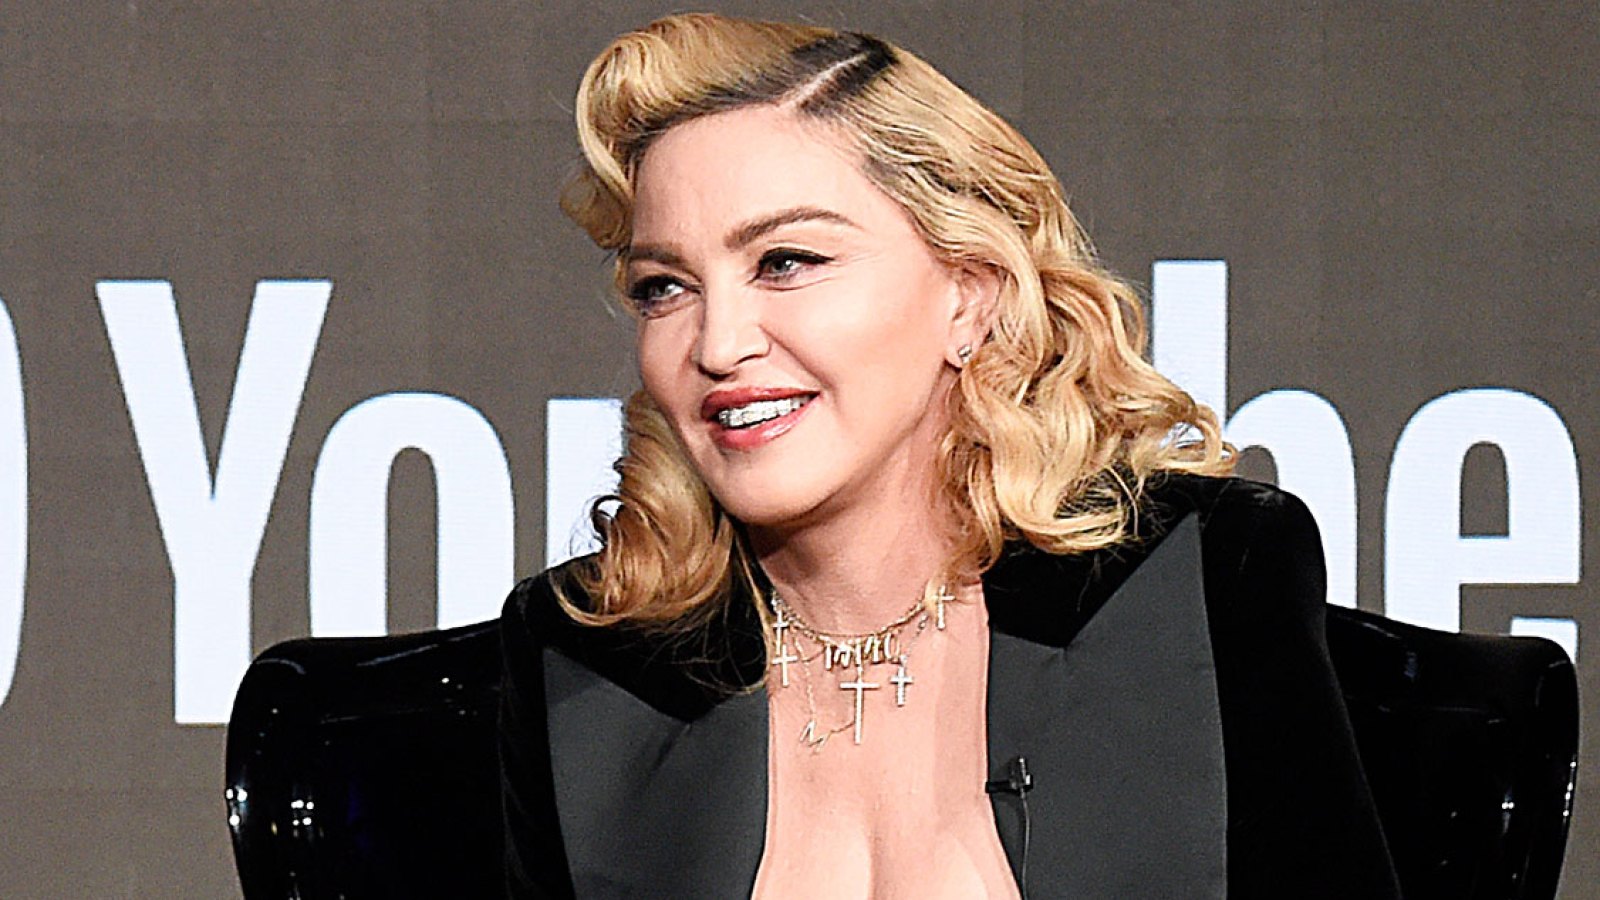 Madonna’s Throwback Pic Shows Her Awkward Teen Years, Sewing Skills